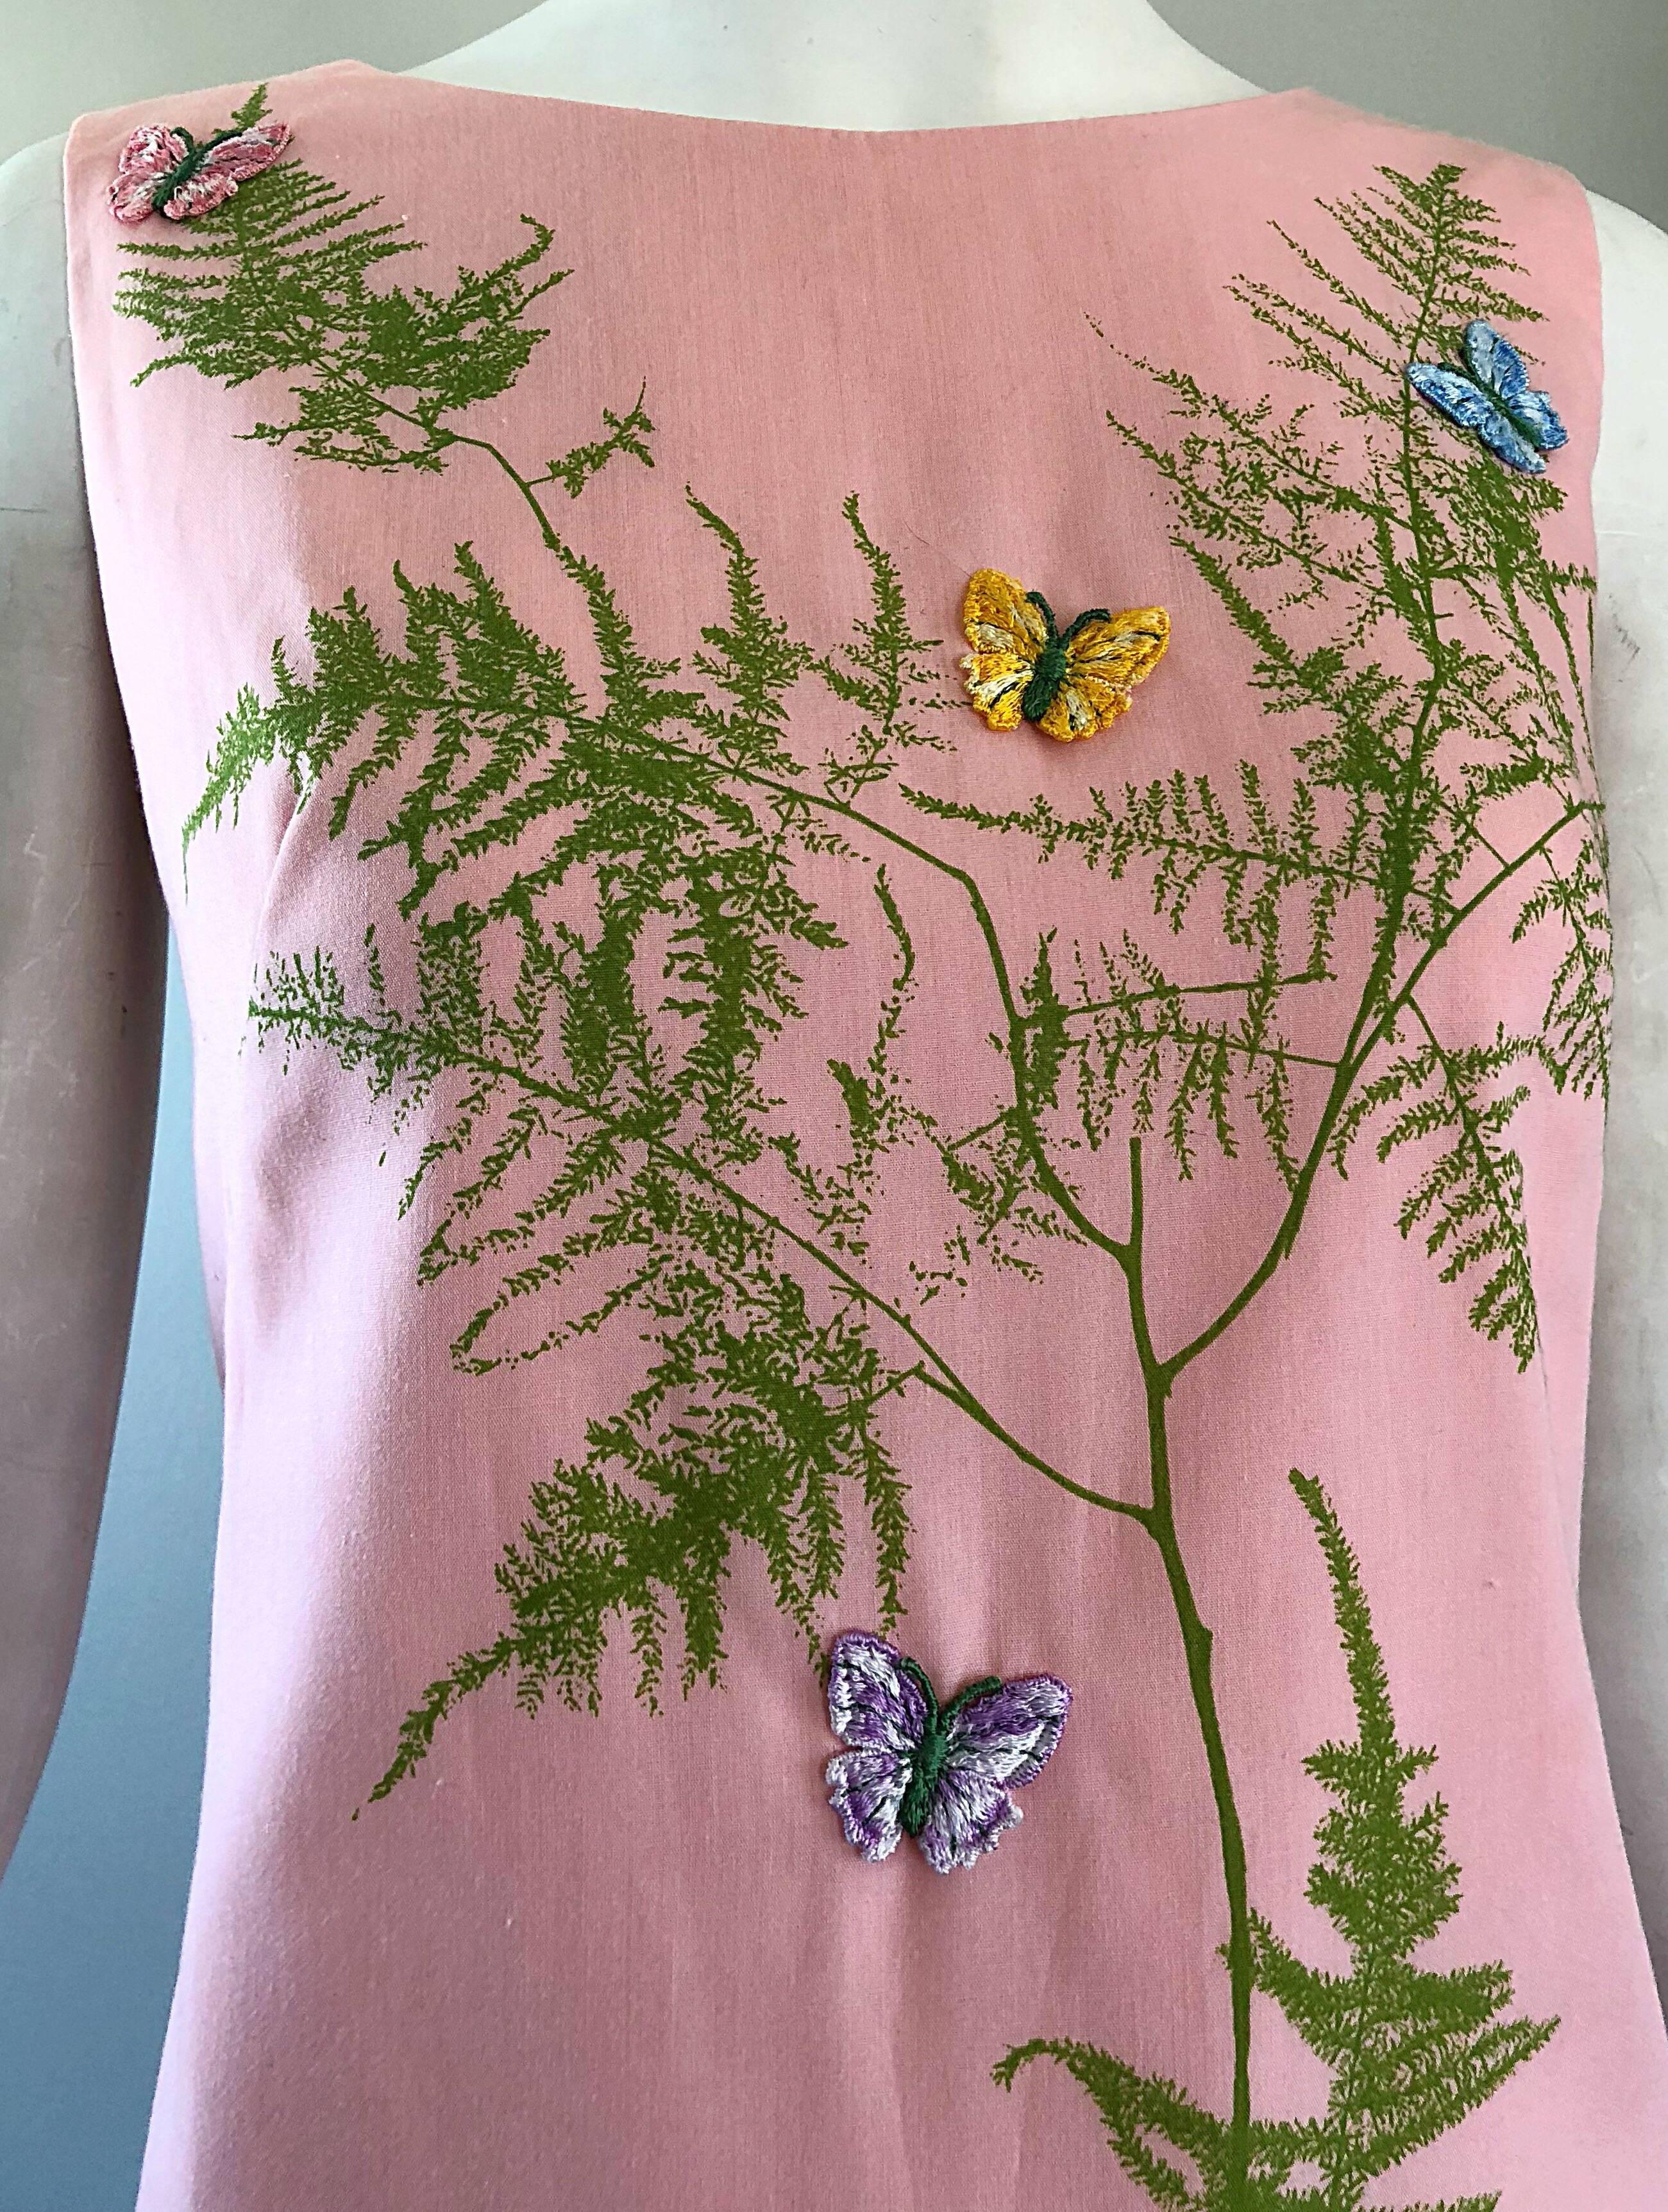 Chic 60s light pale pink cotton novelty shift dress! Features printed trees in olive green throughout. Embroidered butterflies in purple, blue, yellow and pink hand-sewn throughout. Perfect shift style is easy and flattering to wear. Full metal